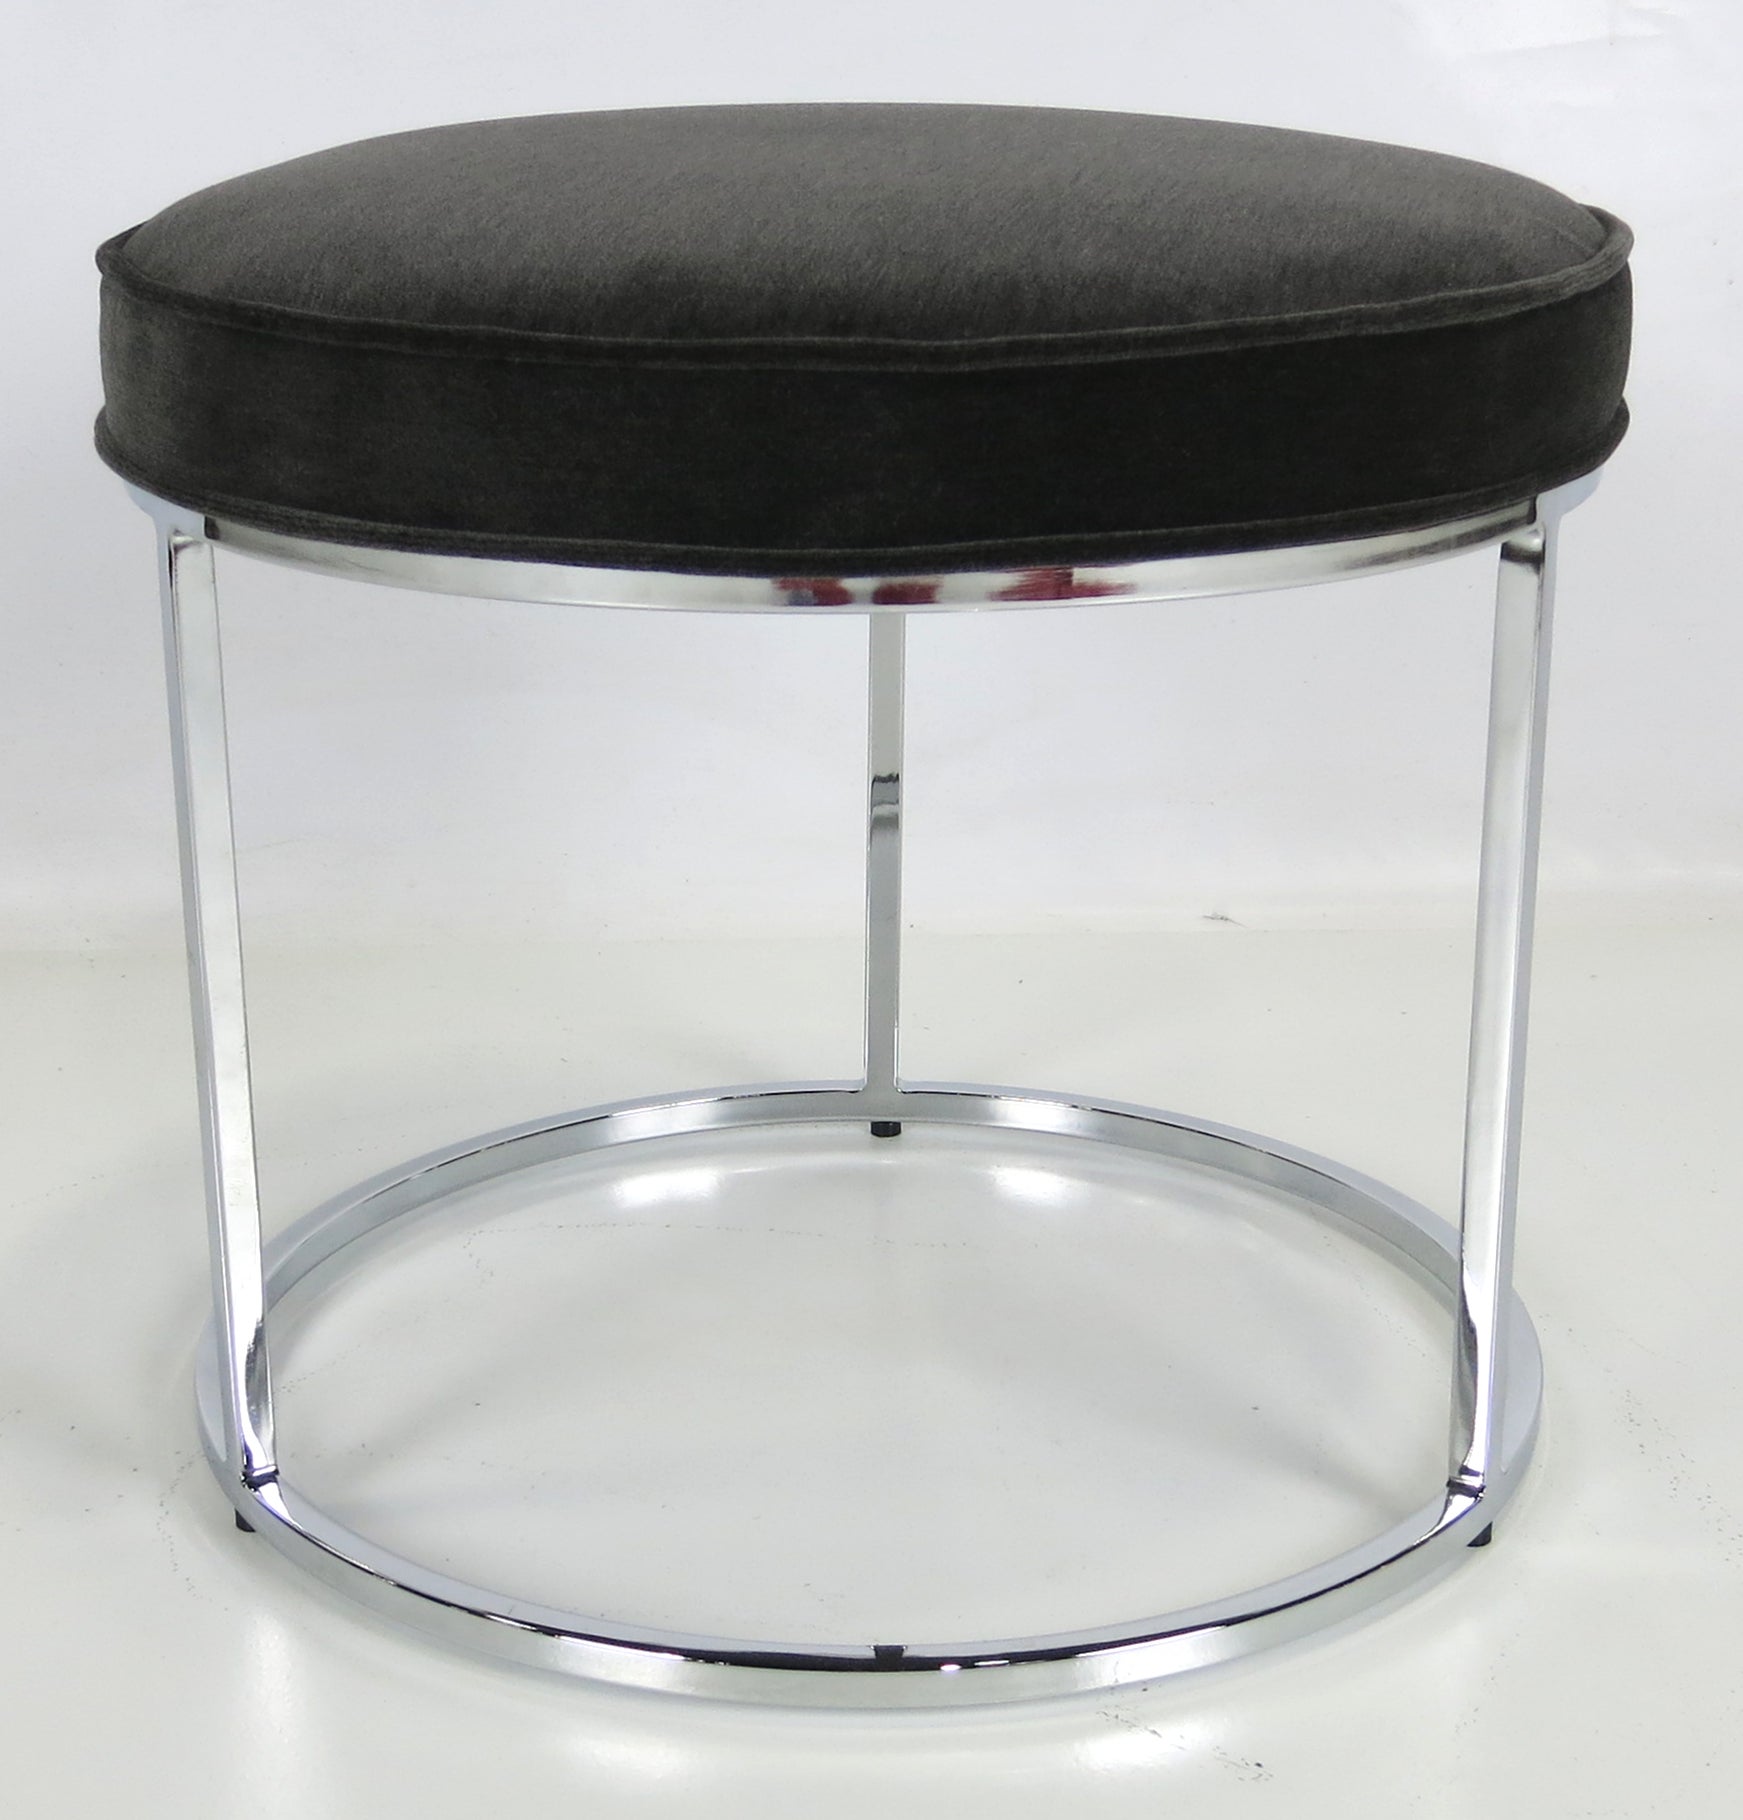 Pair of Round Chrome upholstered stools by Milo Baughman